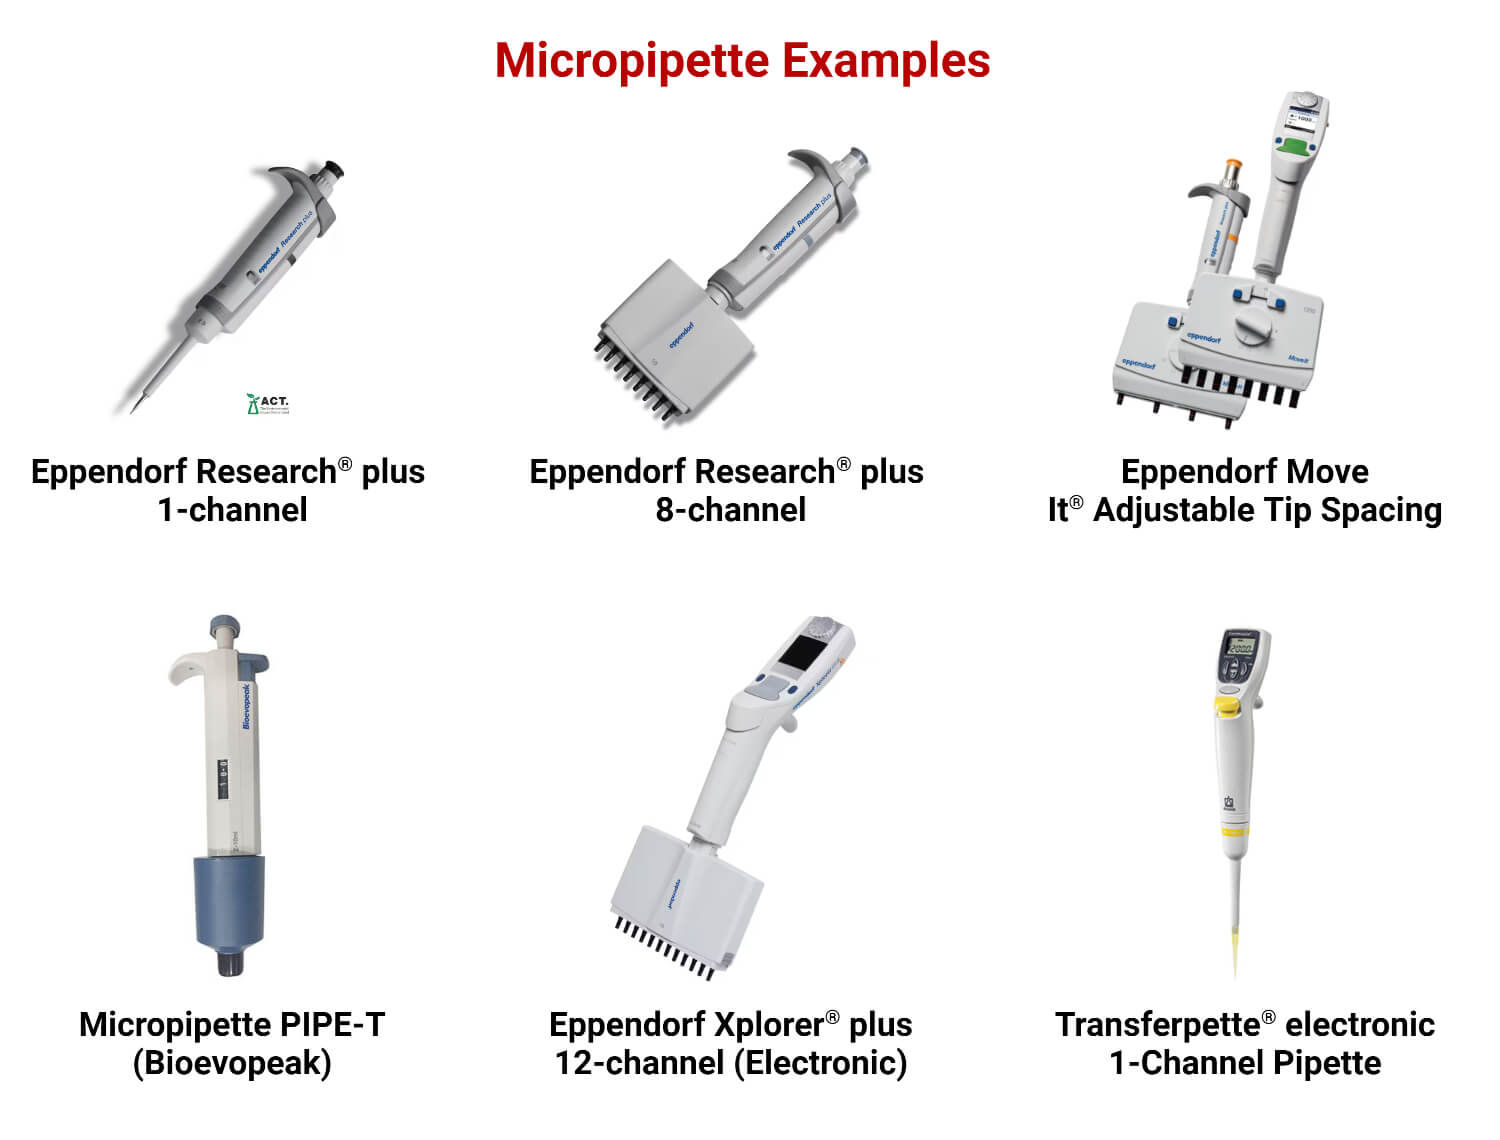 Examples of Micropipette